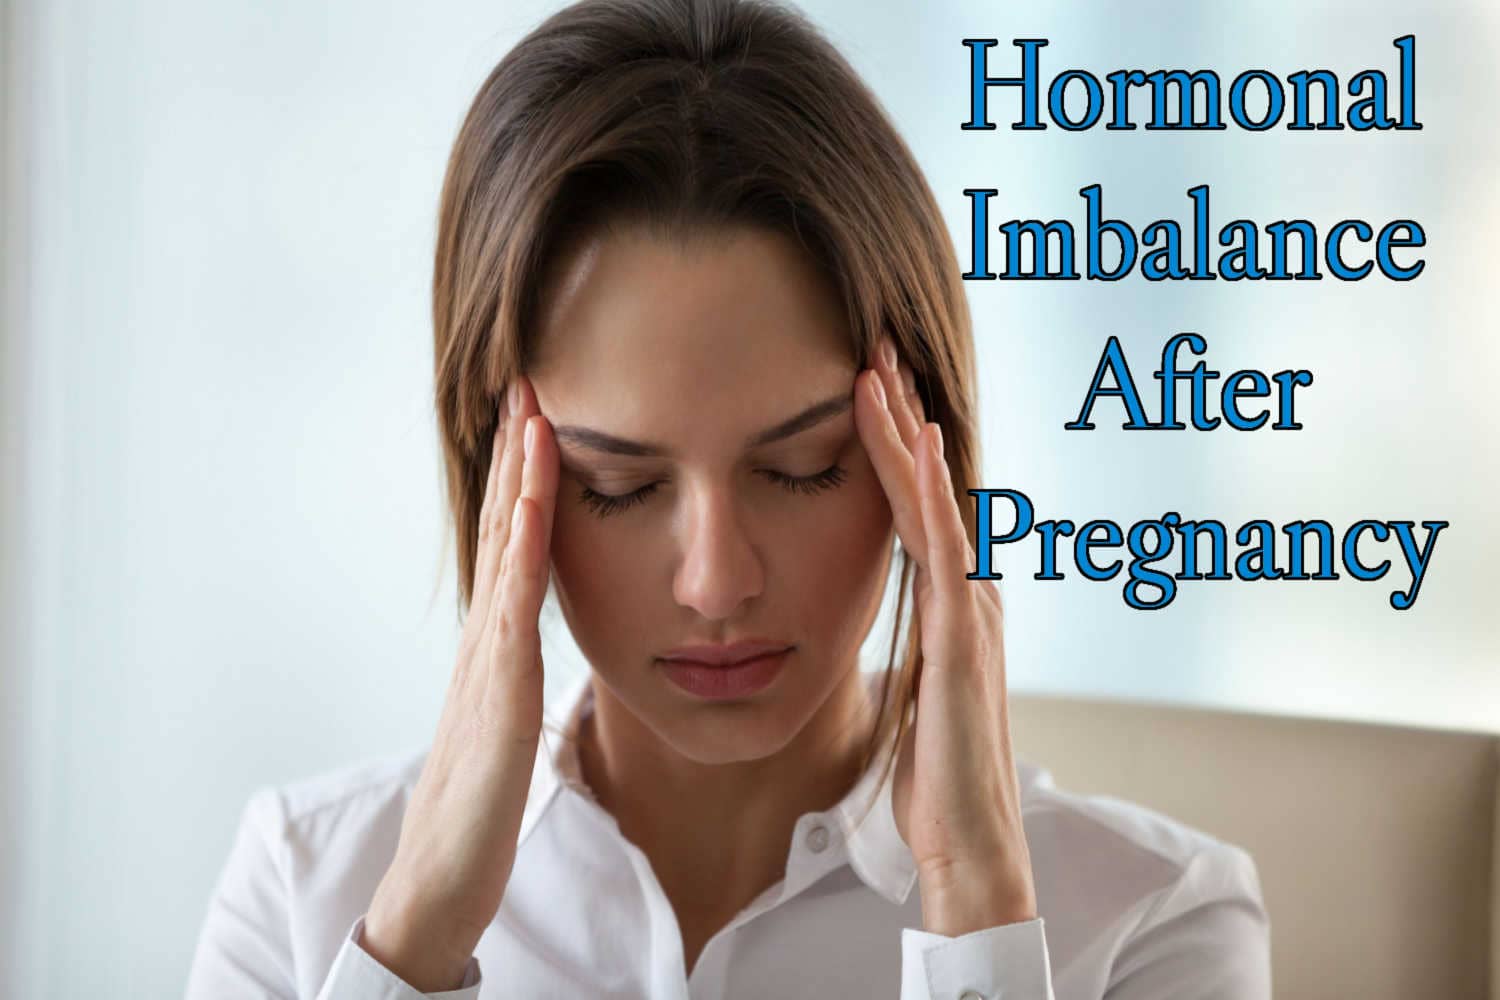 Hormonal Imbalance After Pregnancy